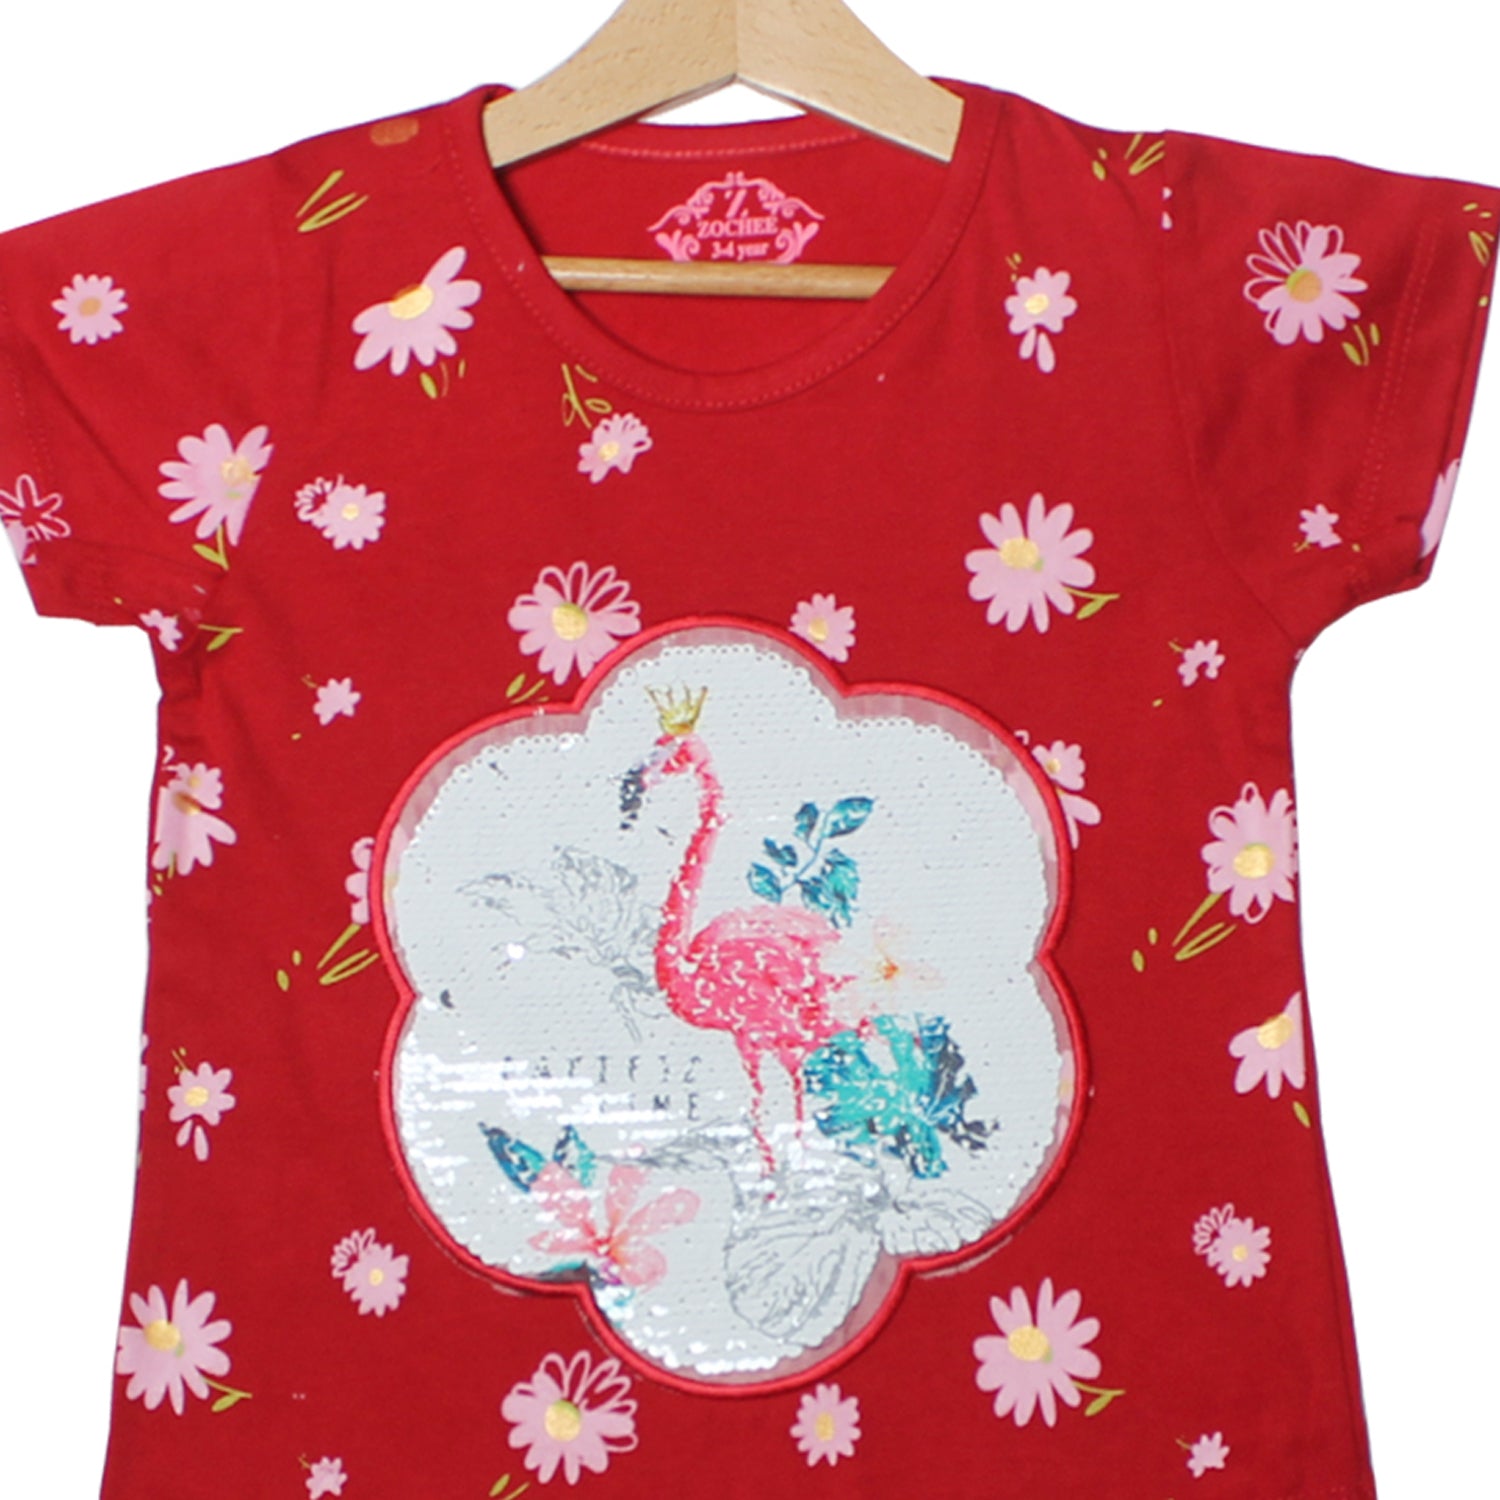 NEW RED FLOWER WITH SWAN PATCH PRINTED T-SHIRT TOP FOR GIRLS